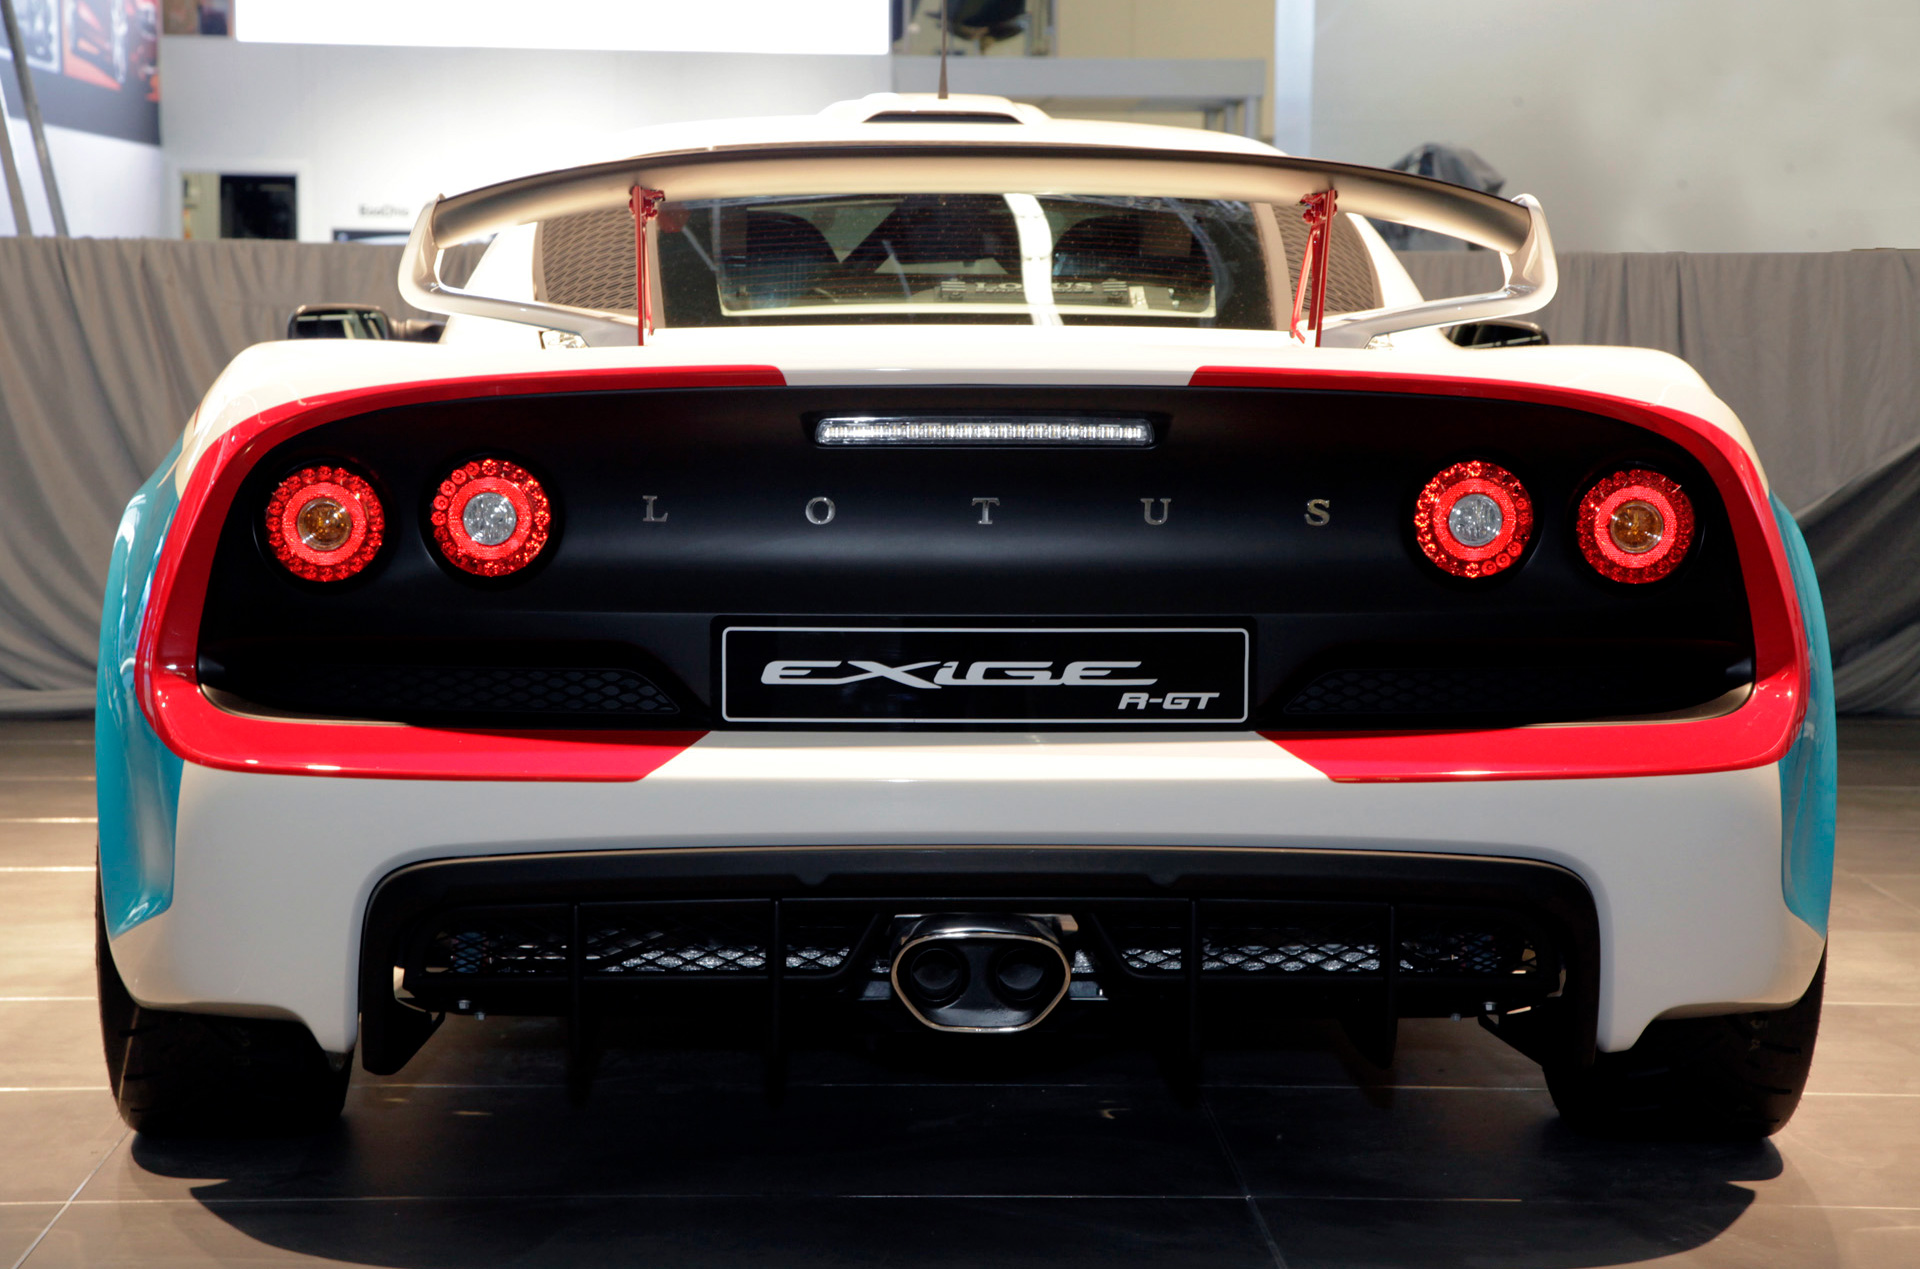 2012 Lotus Exige R-GT - Picture 6 of 6 - Photo Gallery